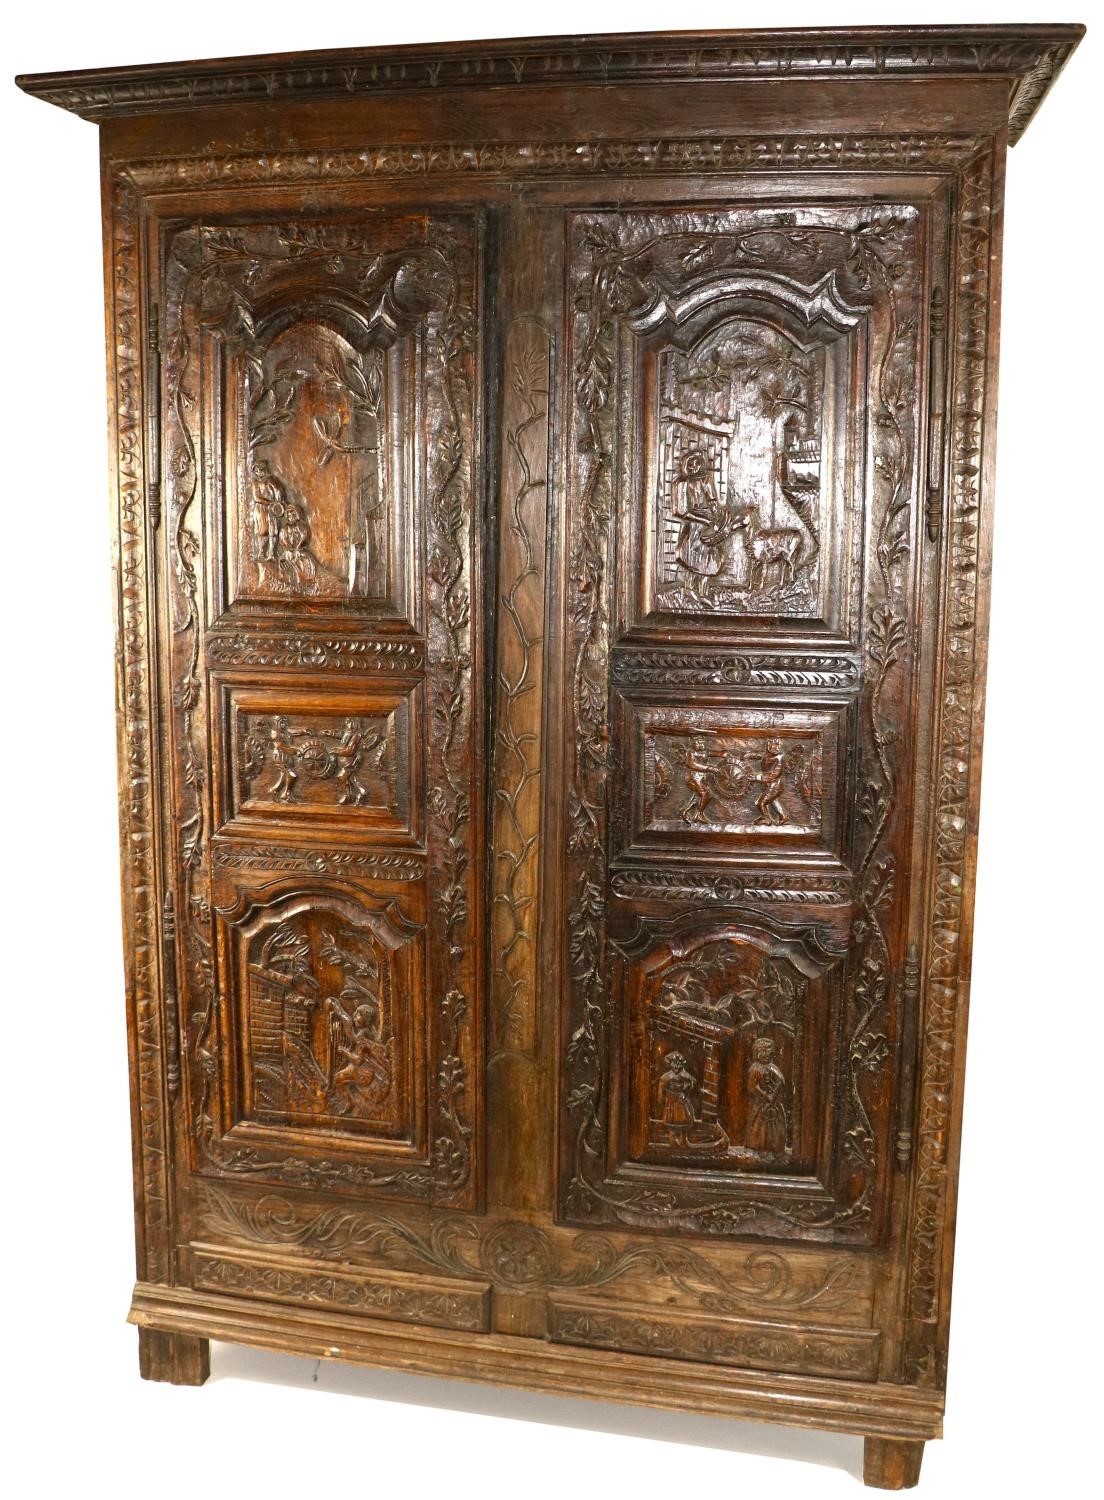 A heavy carved late 18th Century Continental walnut and oak Cupboard, the two triple panel doors